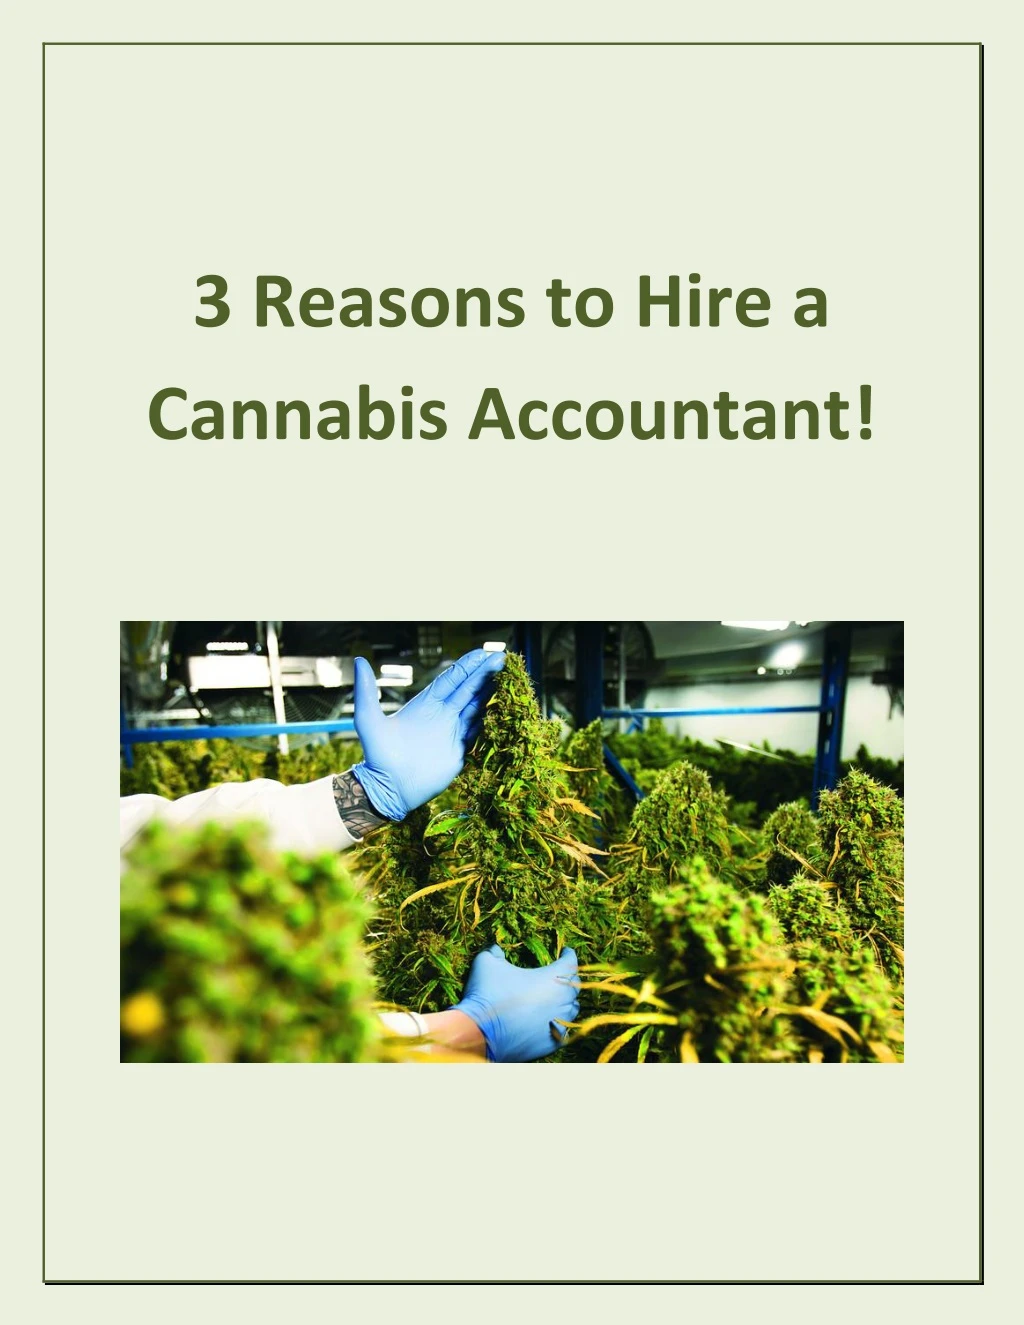 3 reasons to hire a cannabis accountant